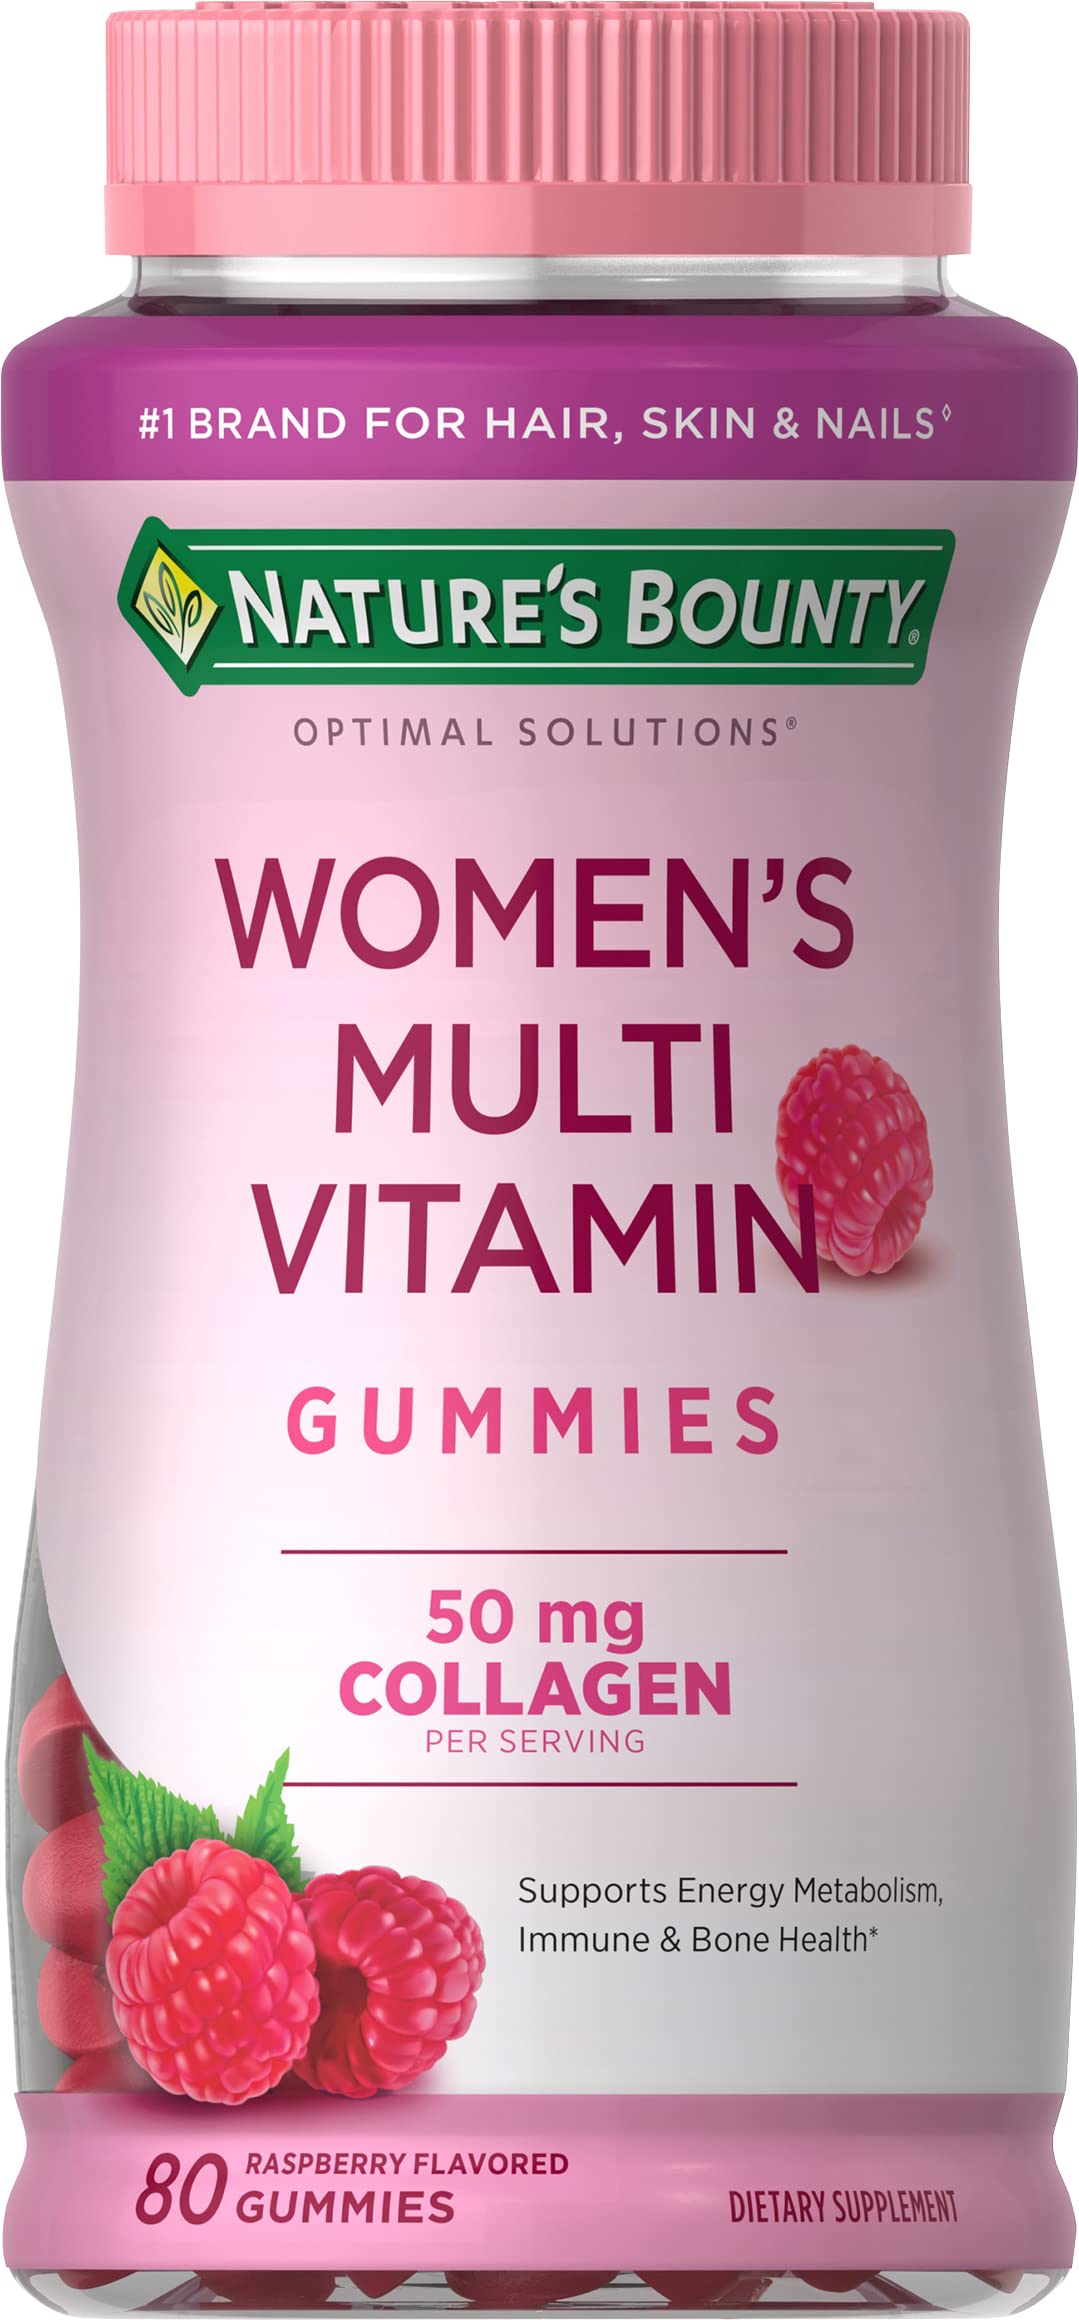 80-Count Nature's Bounty Optimal Solutions Women's Multivitamin Gummies $4.50 + Free Shipping w/ Prime or on $25+